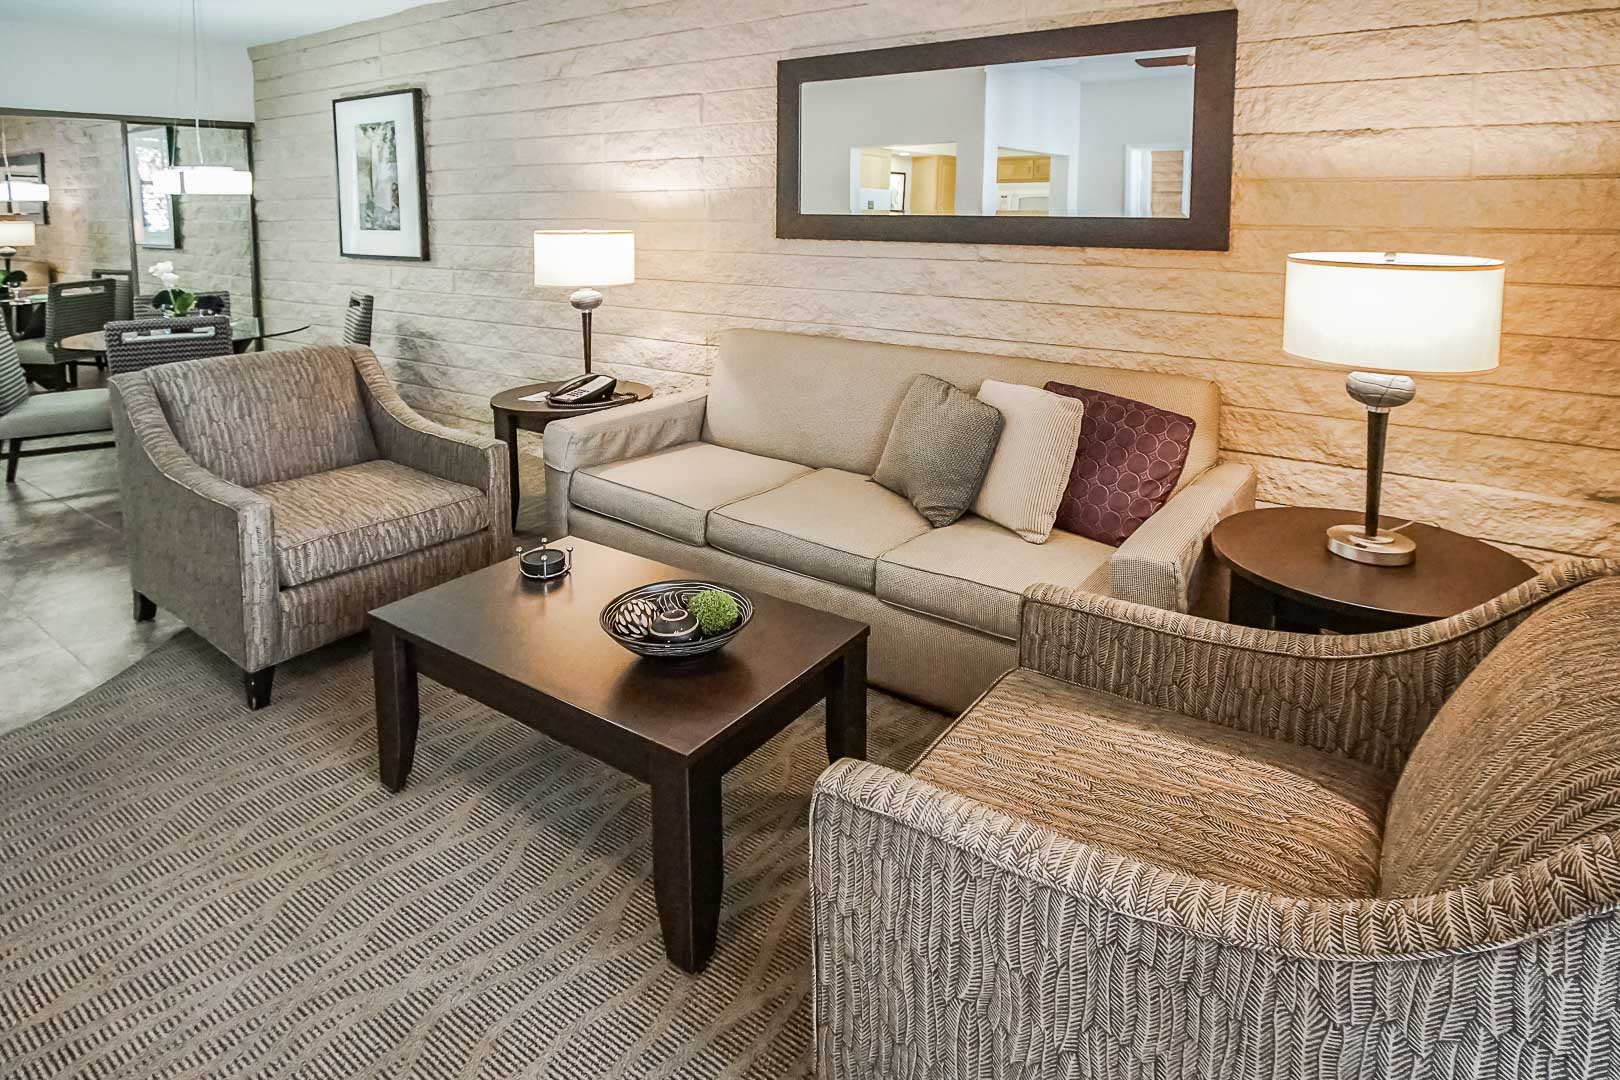 A modern living room area at VRI's Palm Springs Tennis Club in California.